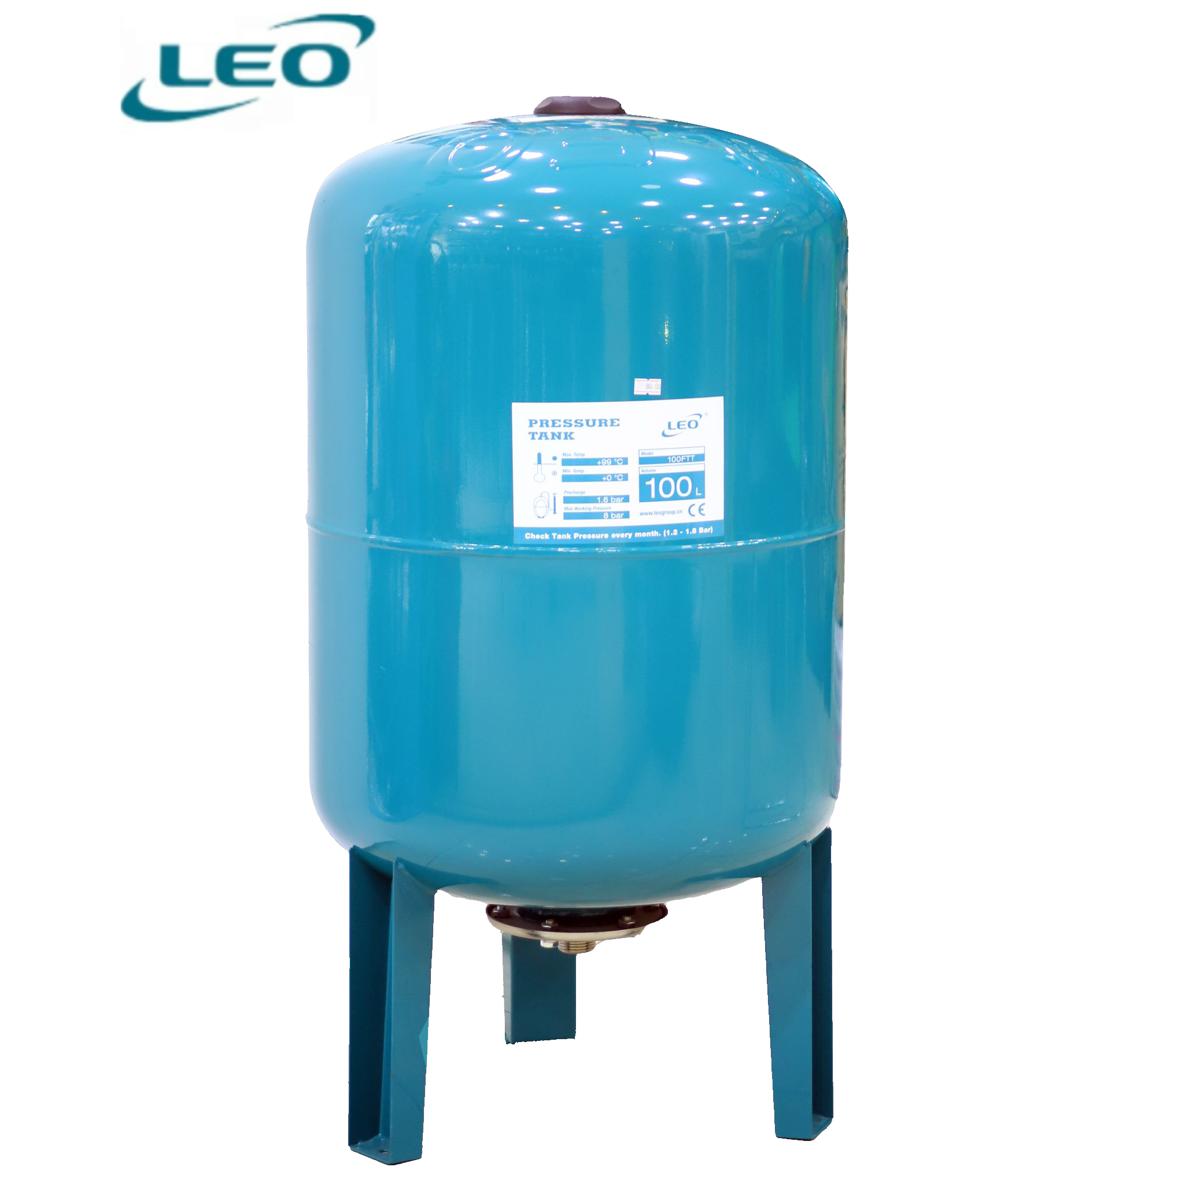 LEO - 300FTTI -  300 LTR PRESSURE TANK Vertical FOR Water Pump ( TANK ONLY )